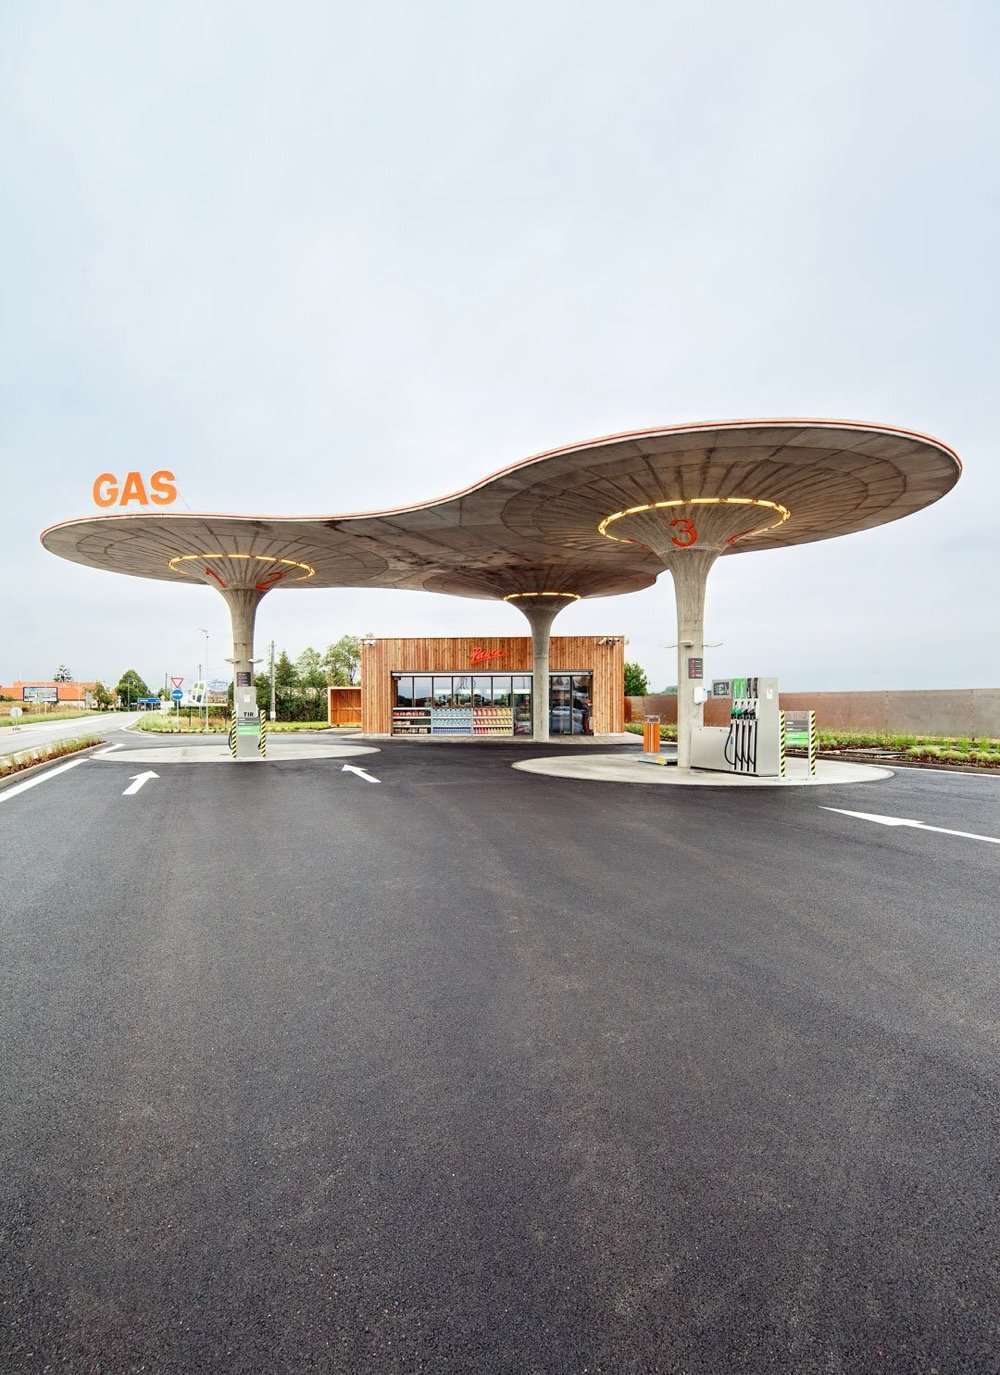 one of the world's most beautiful gas stations